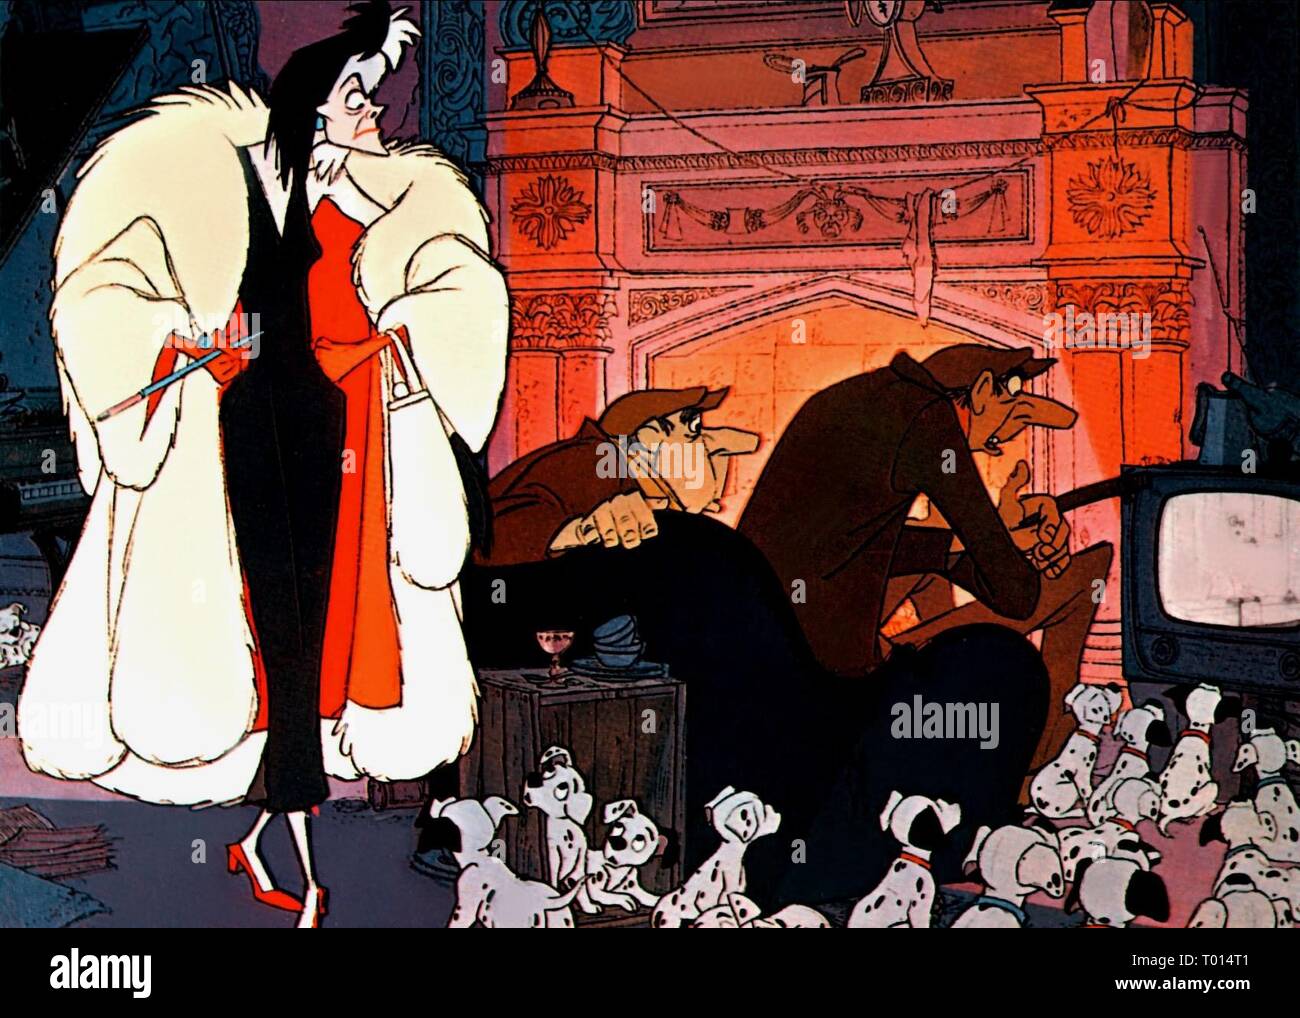 Get The Hundred And One Dalmatians Cruella Pics All In Here